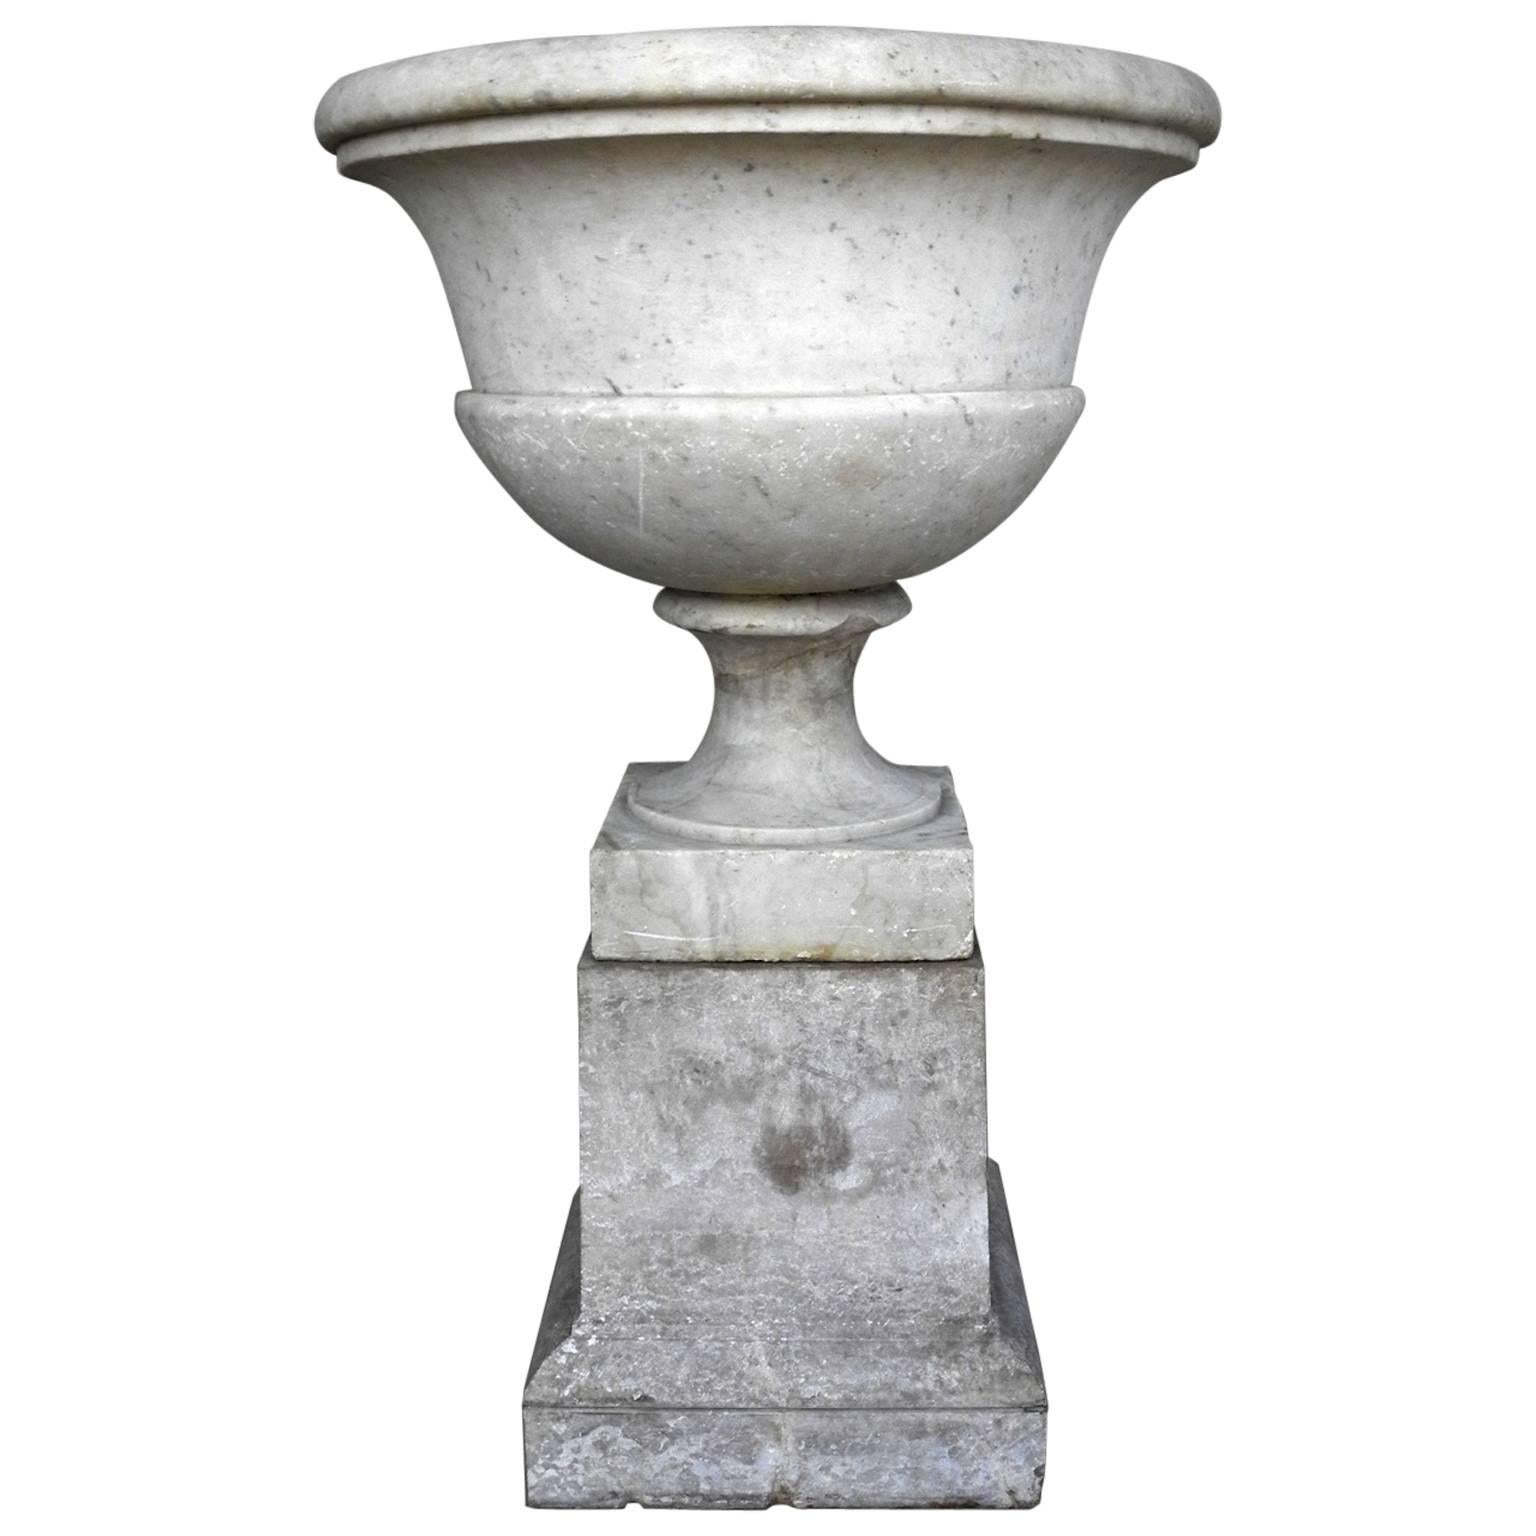 Antique 17th Century Urn and Pedestal from the Amalfi Coast